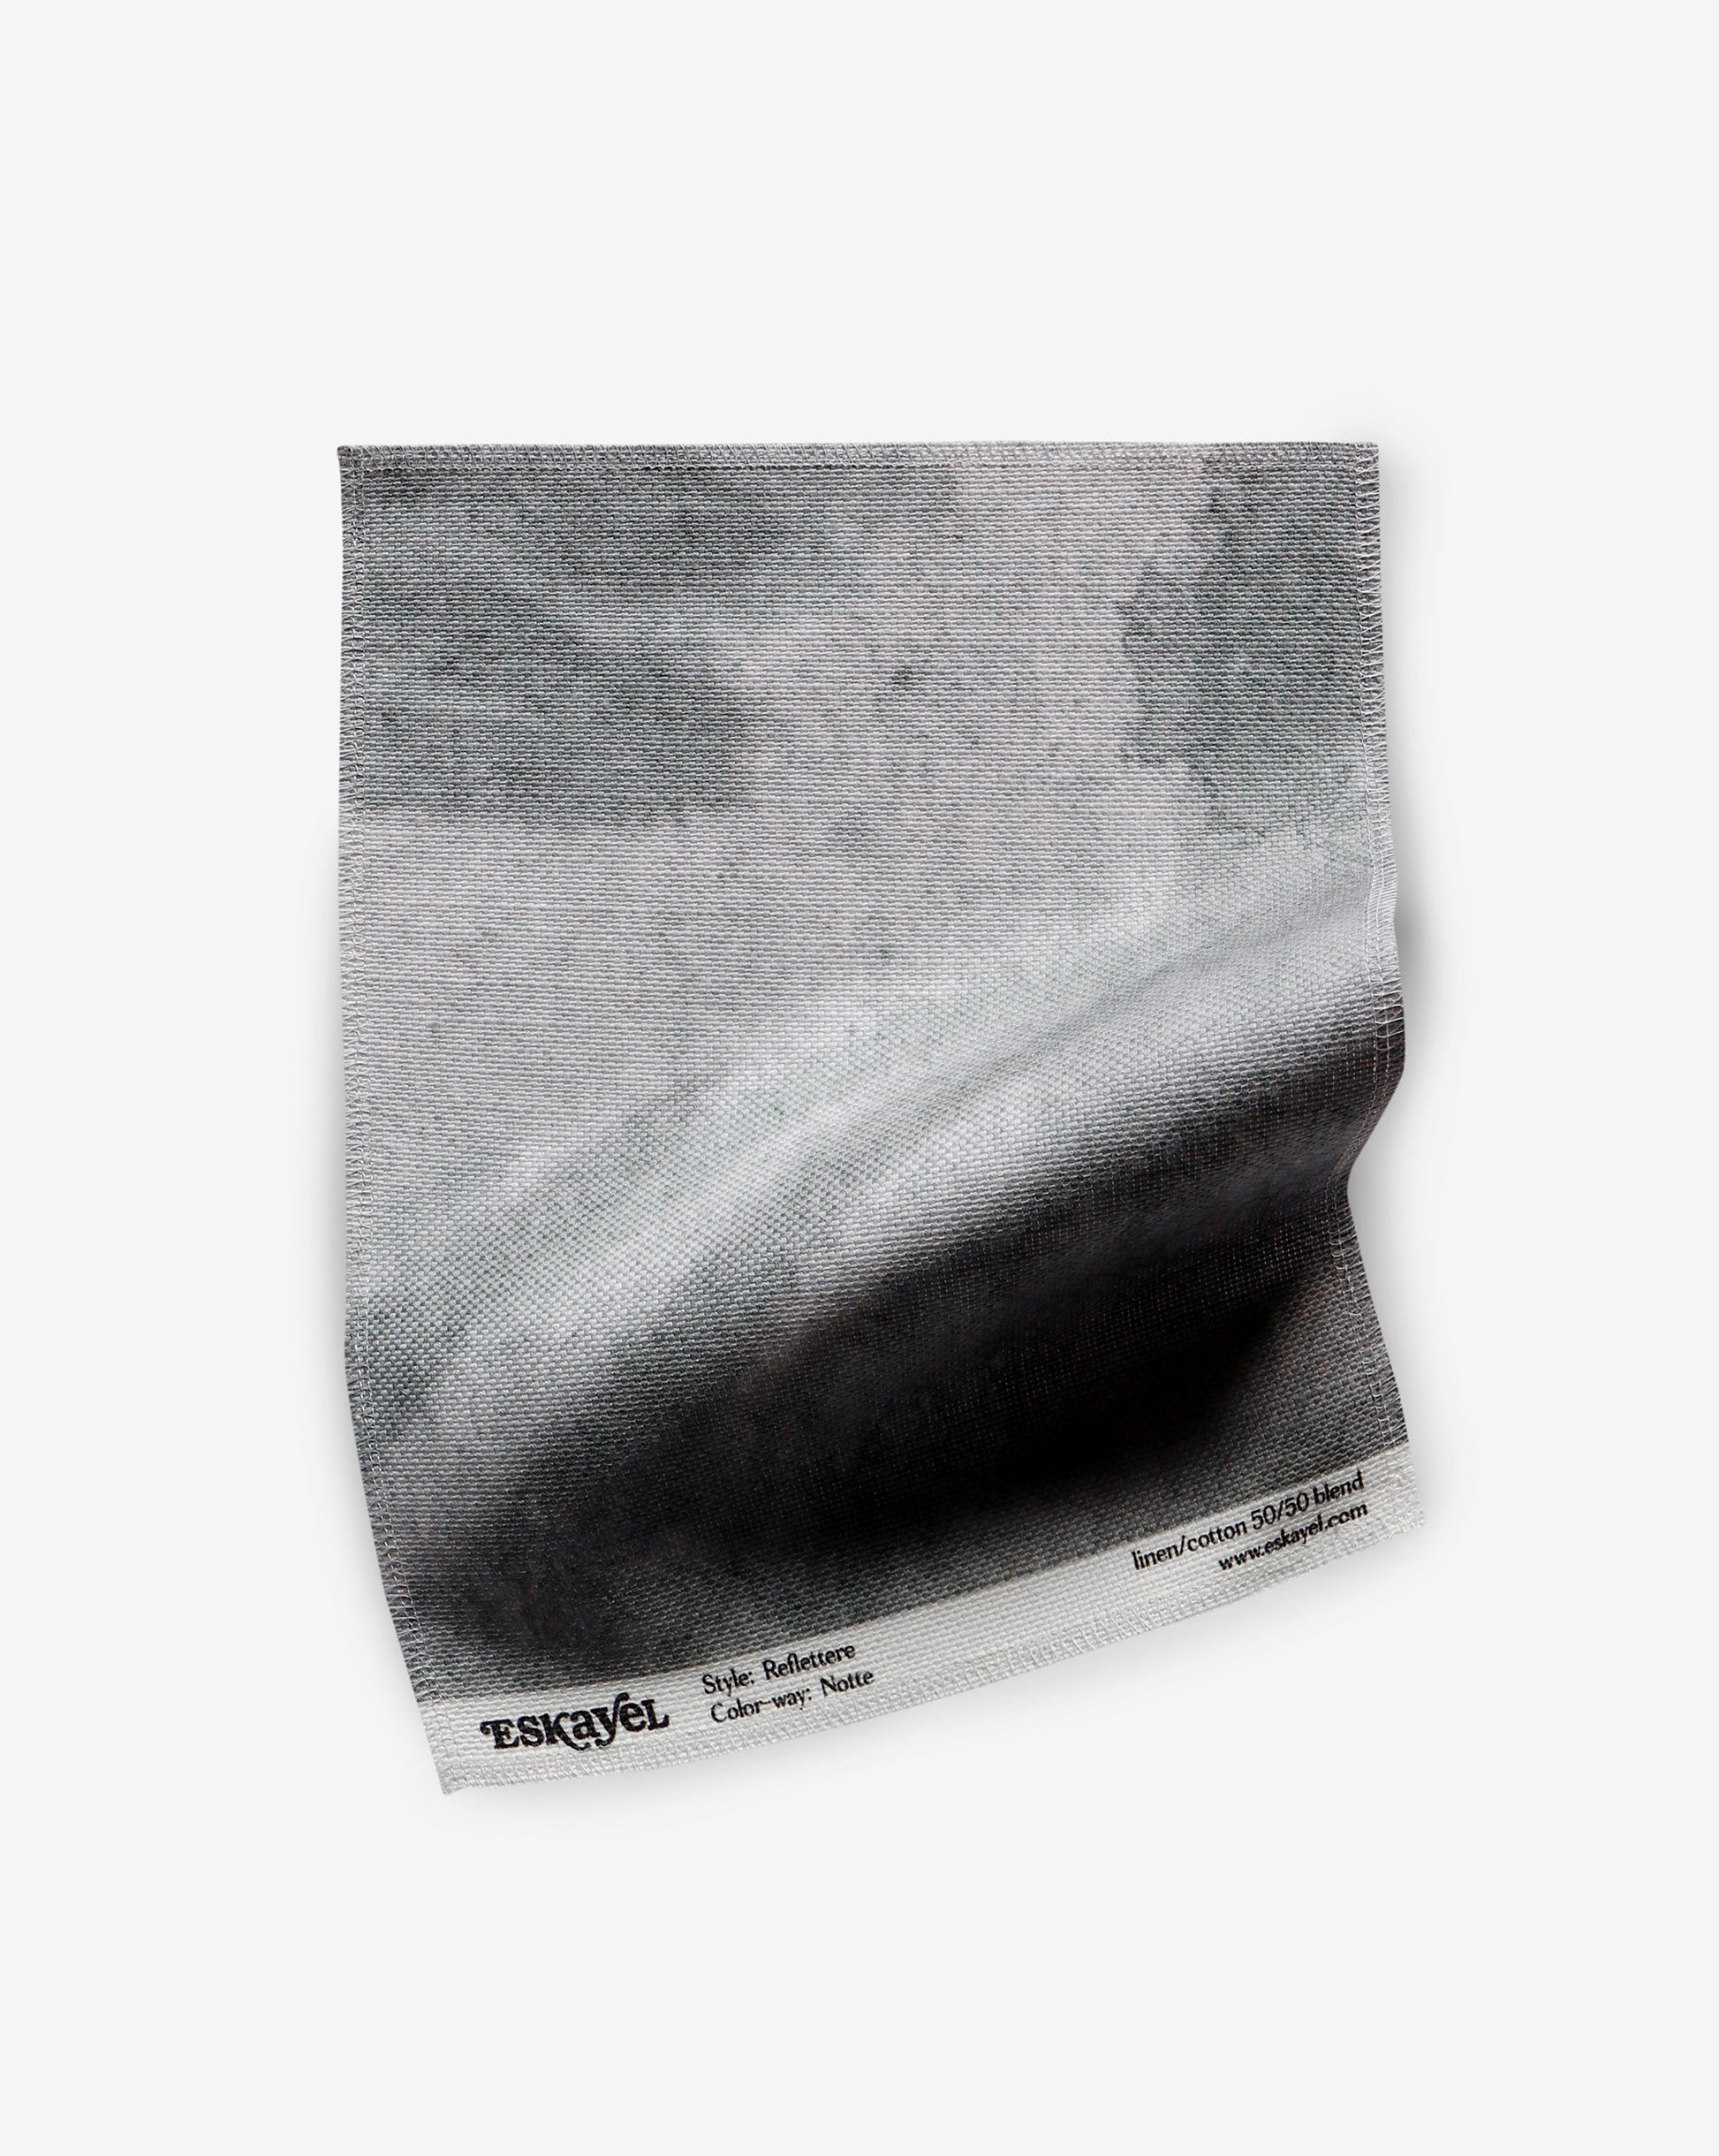 A black and white photo of a wave on a Reflettere Fabric Sample Notte surface